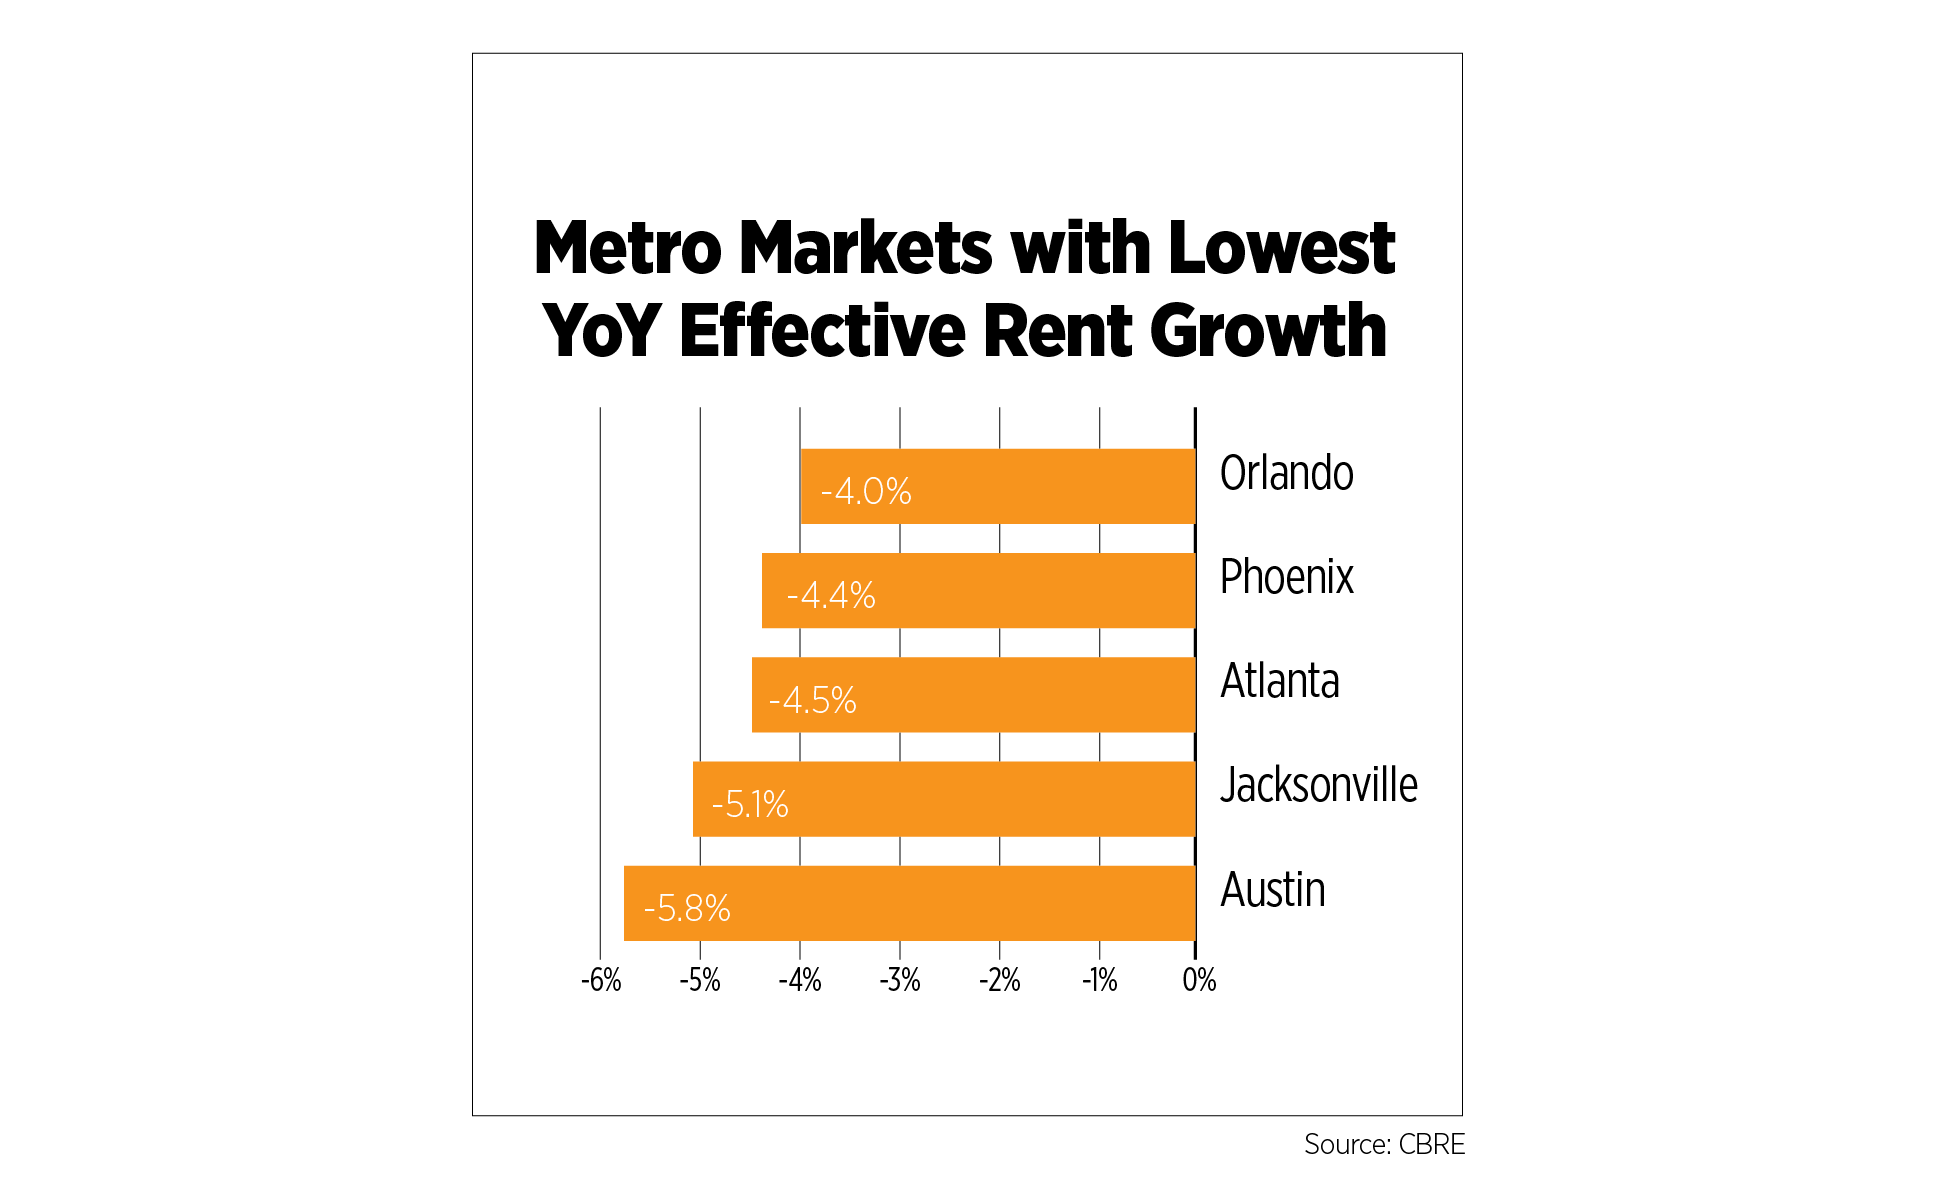 metro markets with lowest YOY effective rent growth